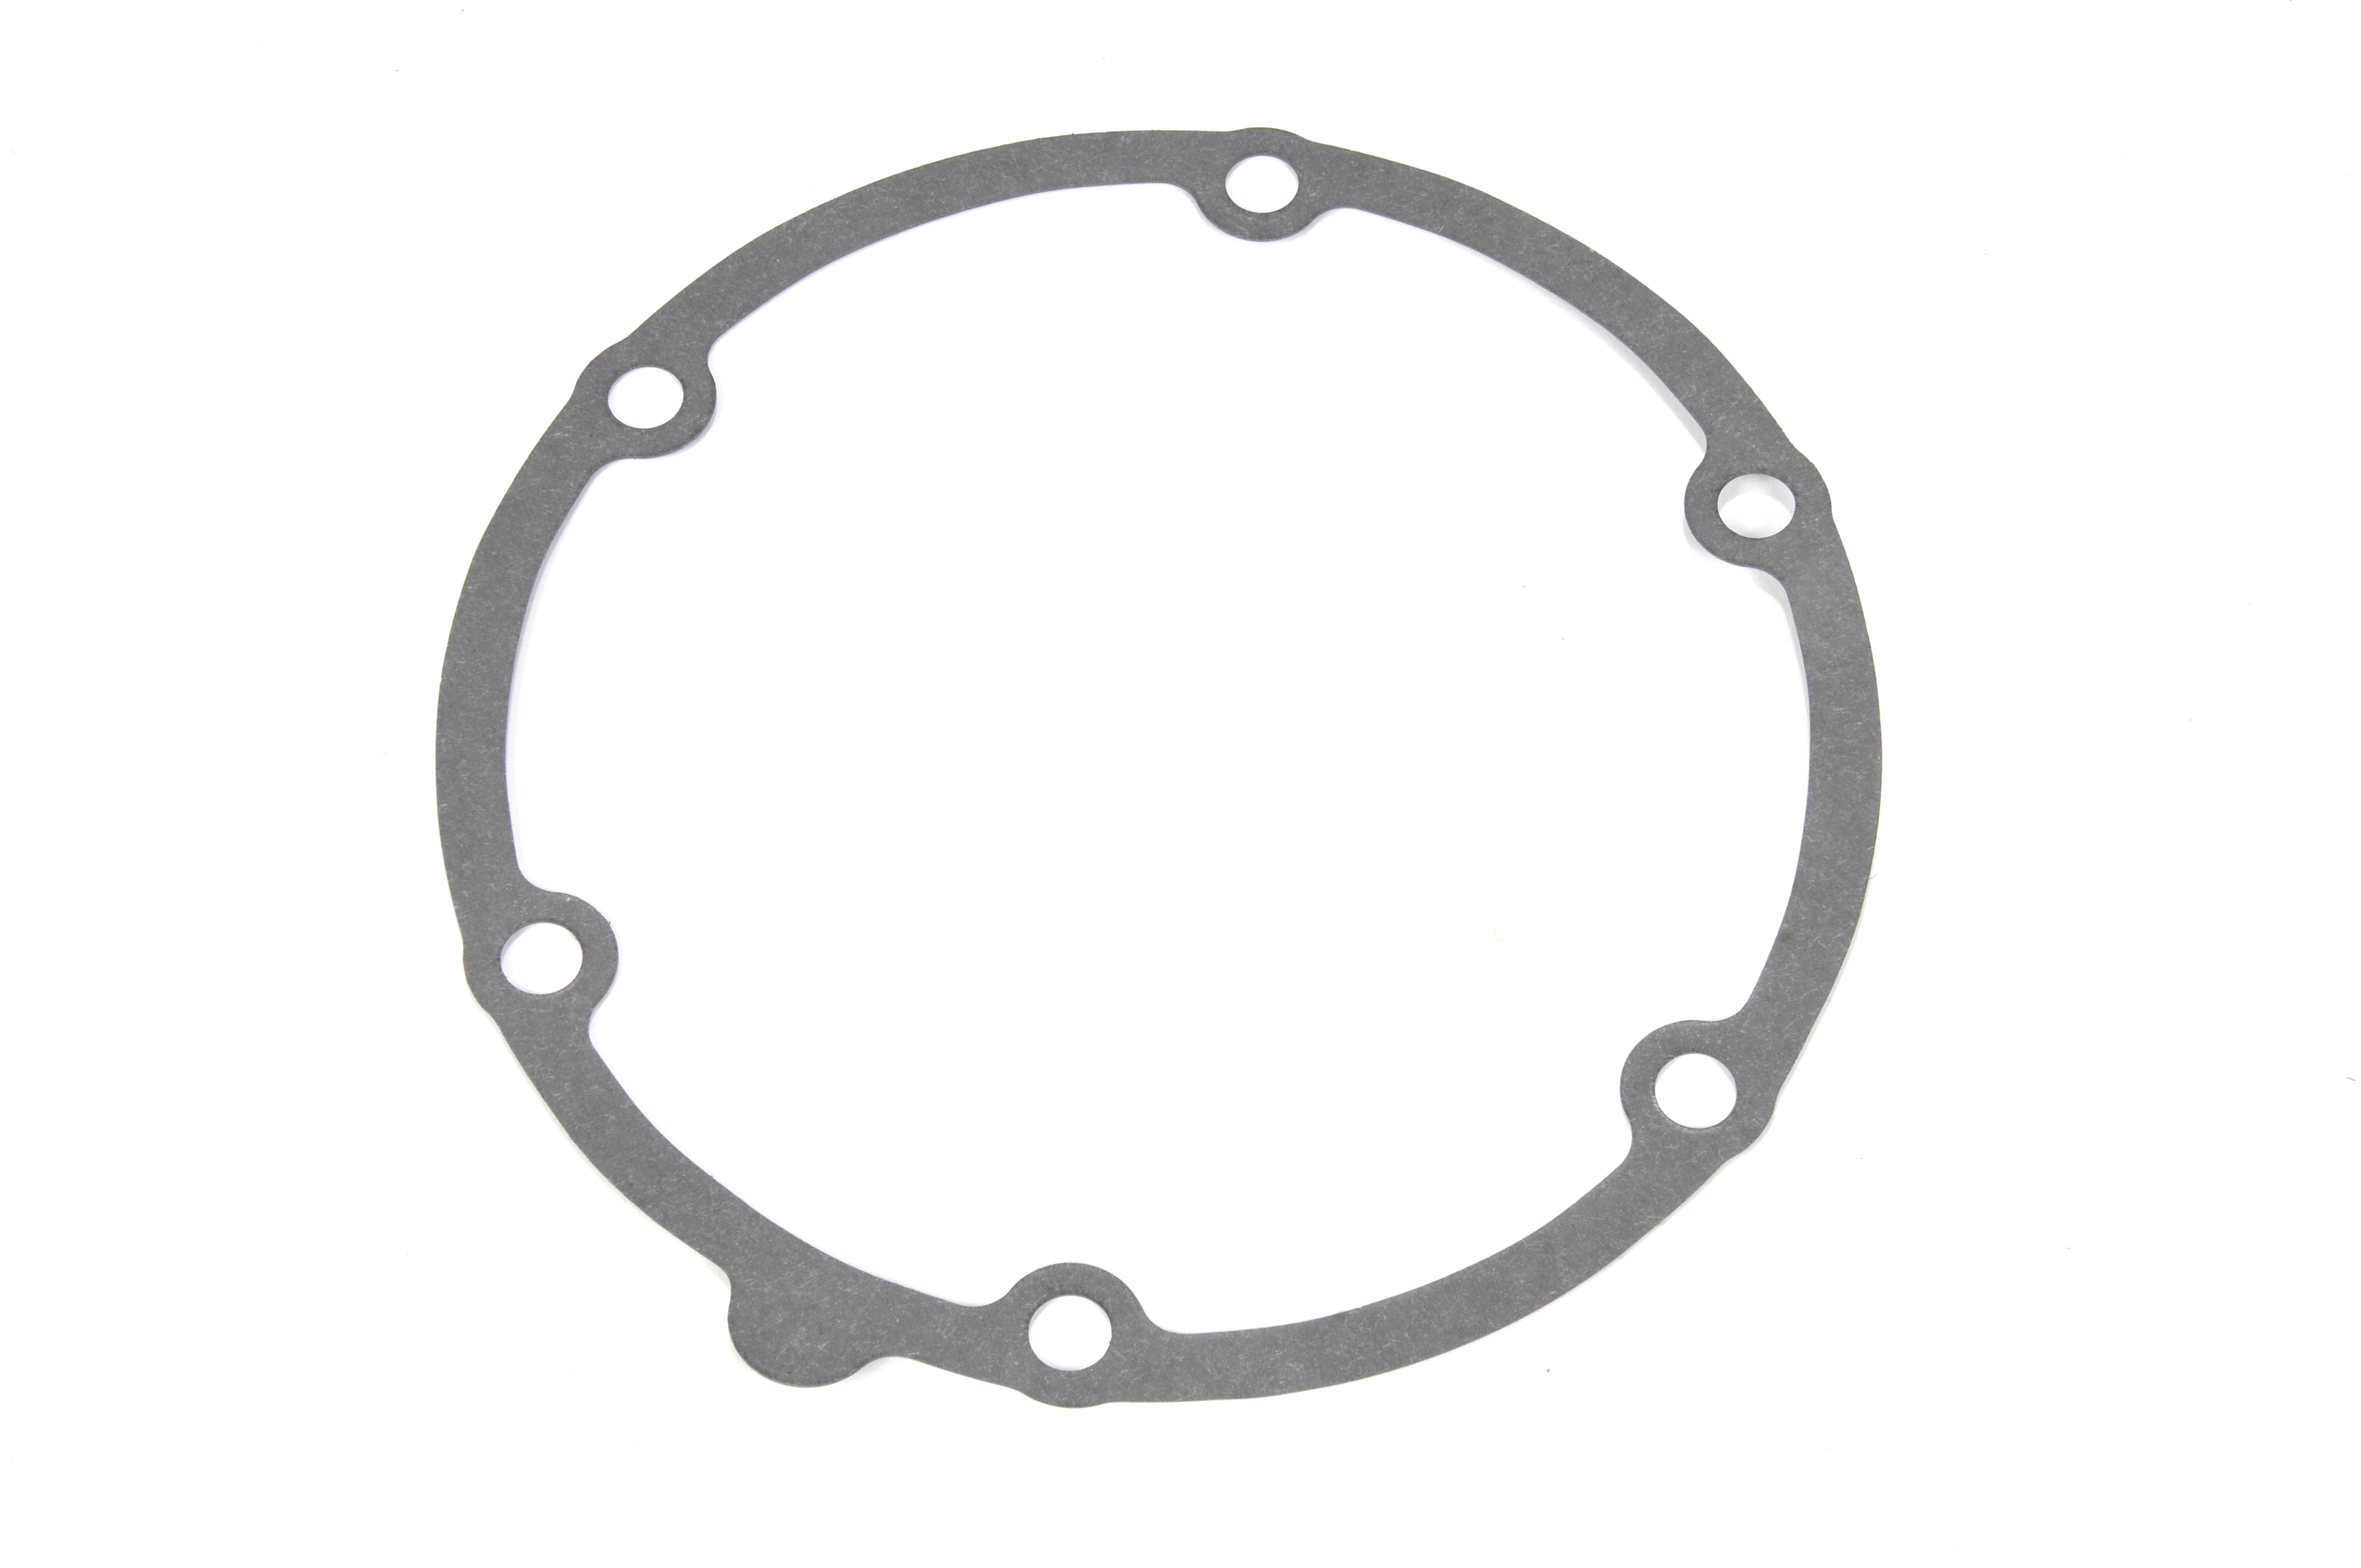 GM GENUINE PARTS - Transfer Case Adapter Gasket - GMP 15642510